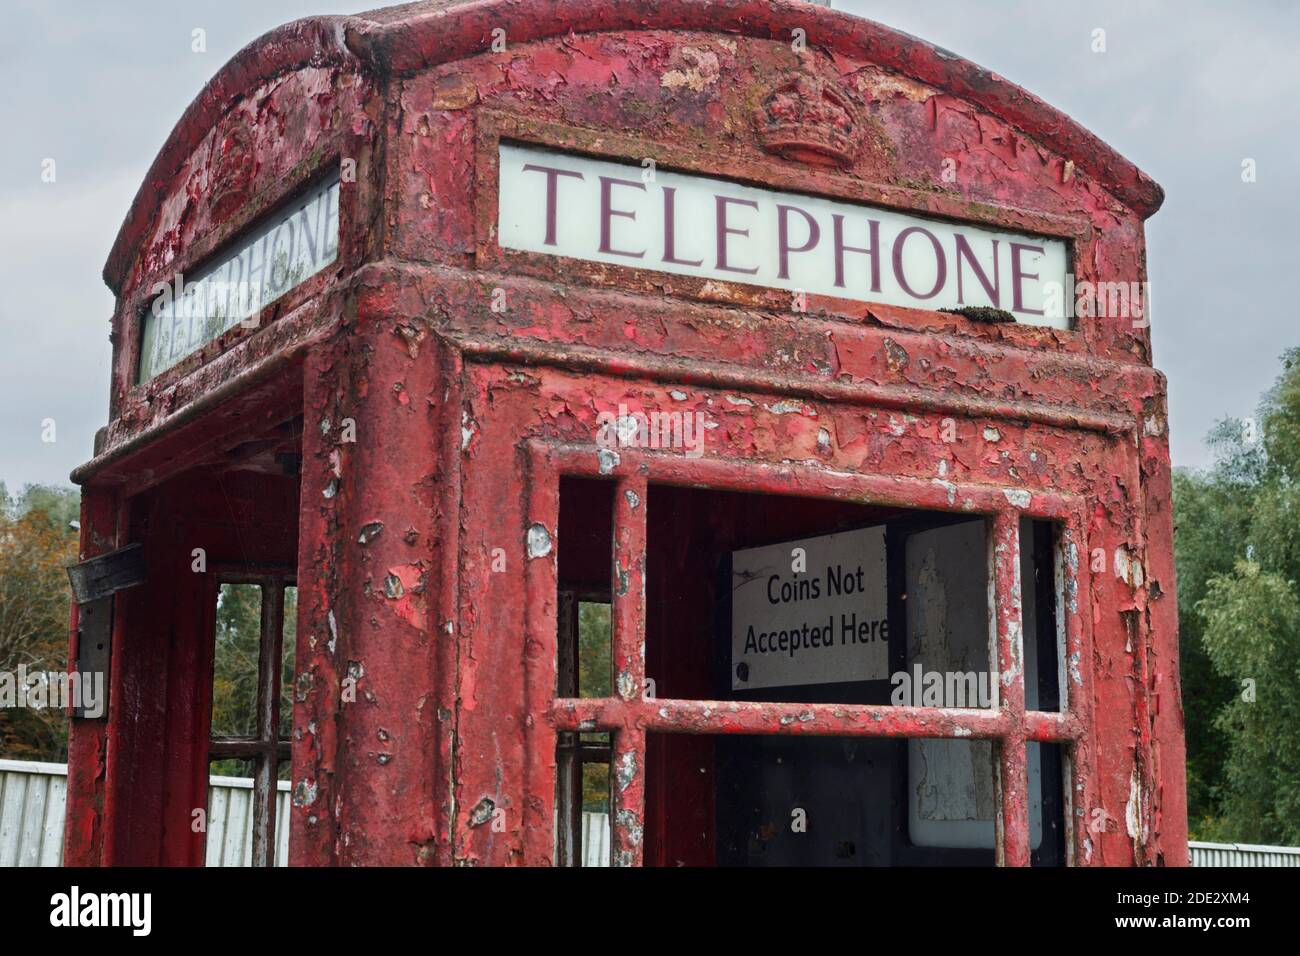 Abandoned old red phone box with broken smashed glass and peeling red paint Stock Photo